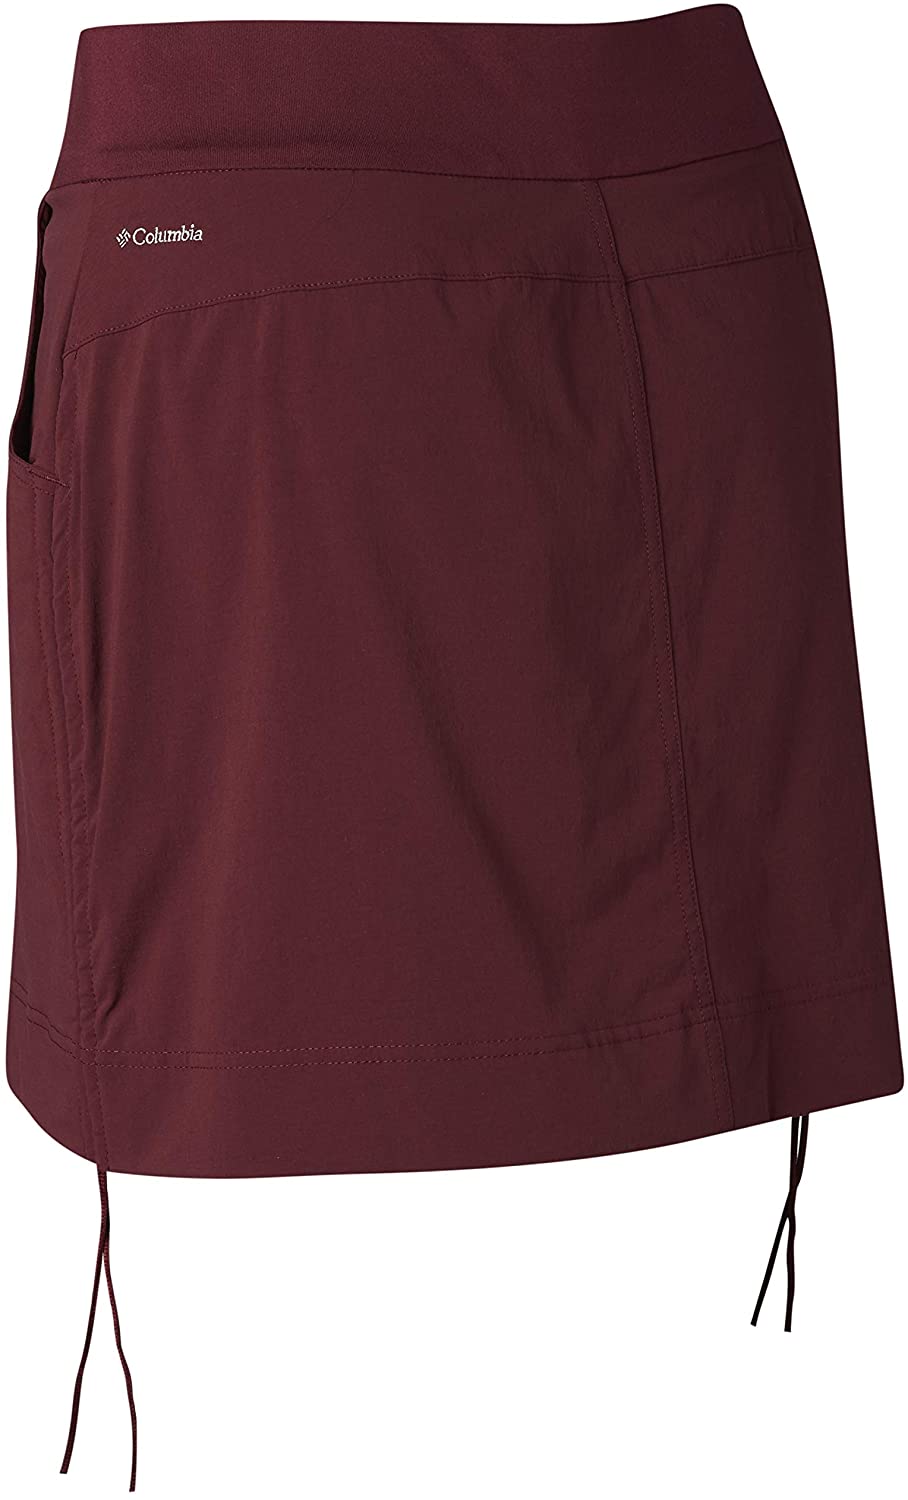 Columbia Womens Plus Size Anytime Casual Skort Black 3X